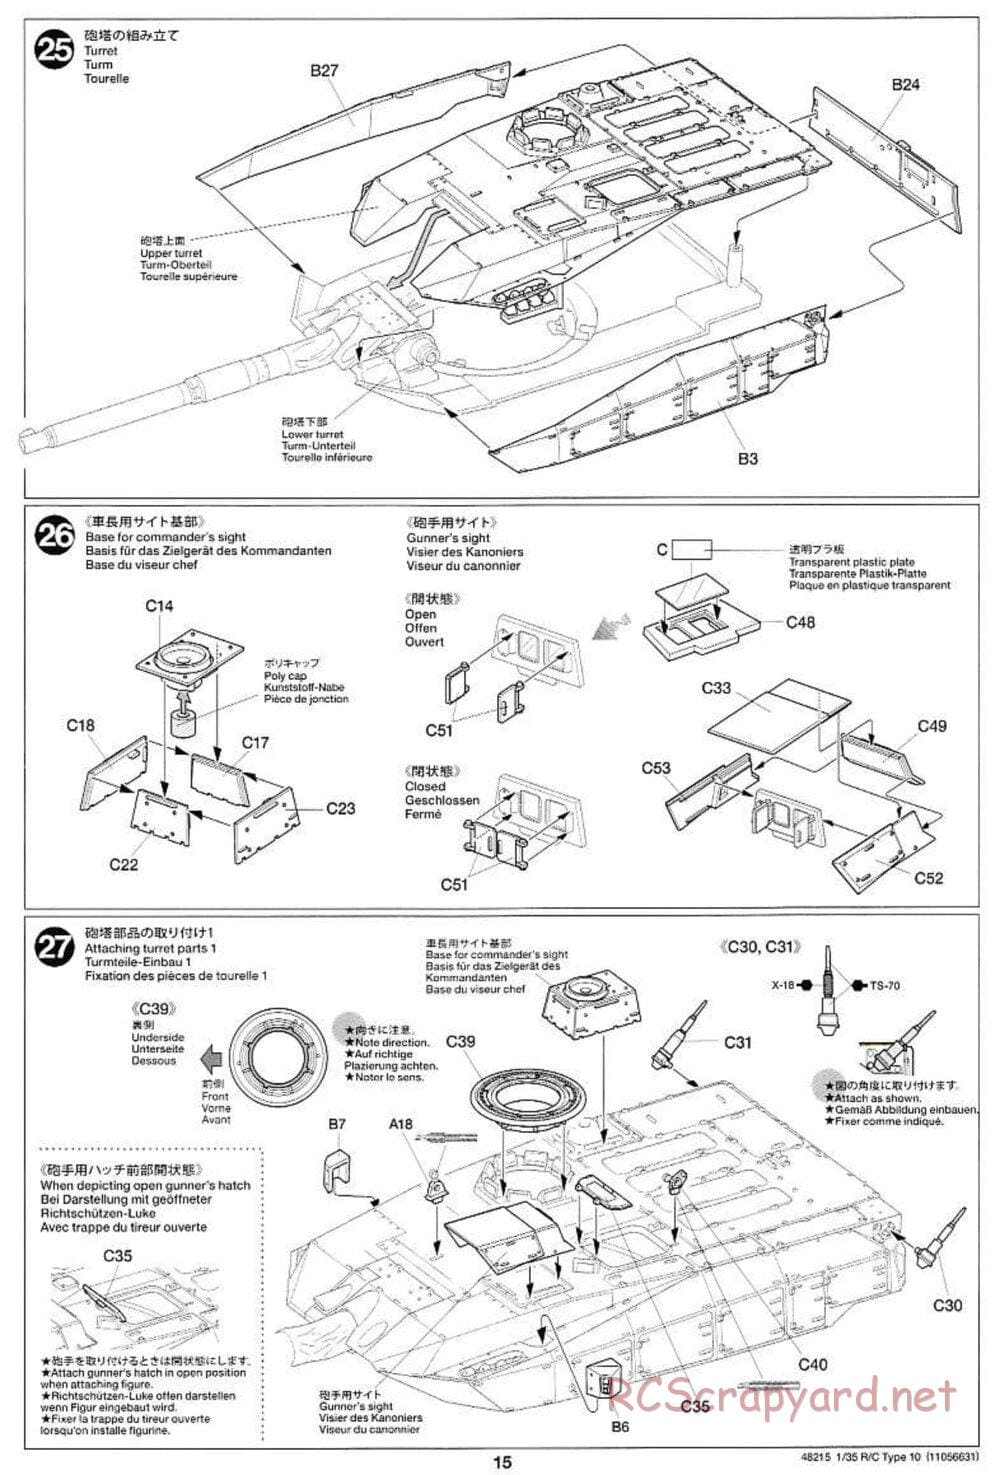 Tamiya - JGSDF Type 10 Tank - 1/35 Scale Chassis - Manual - Page 15